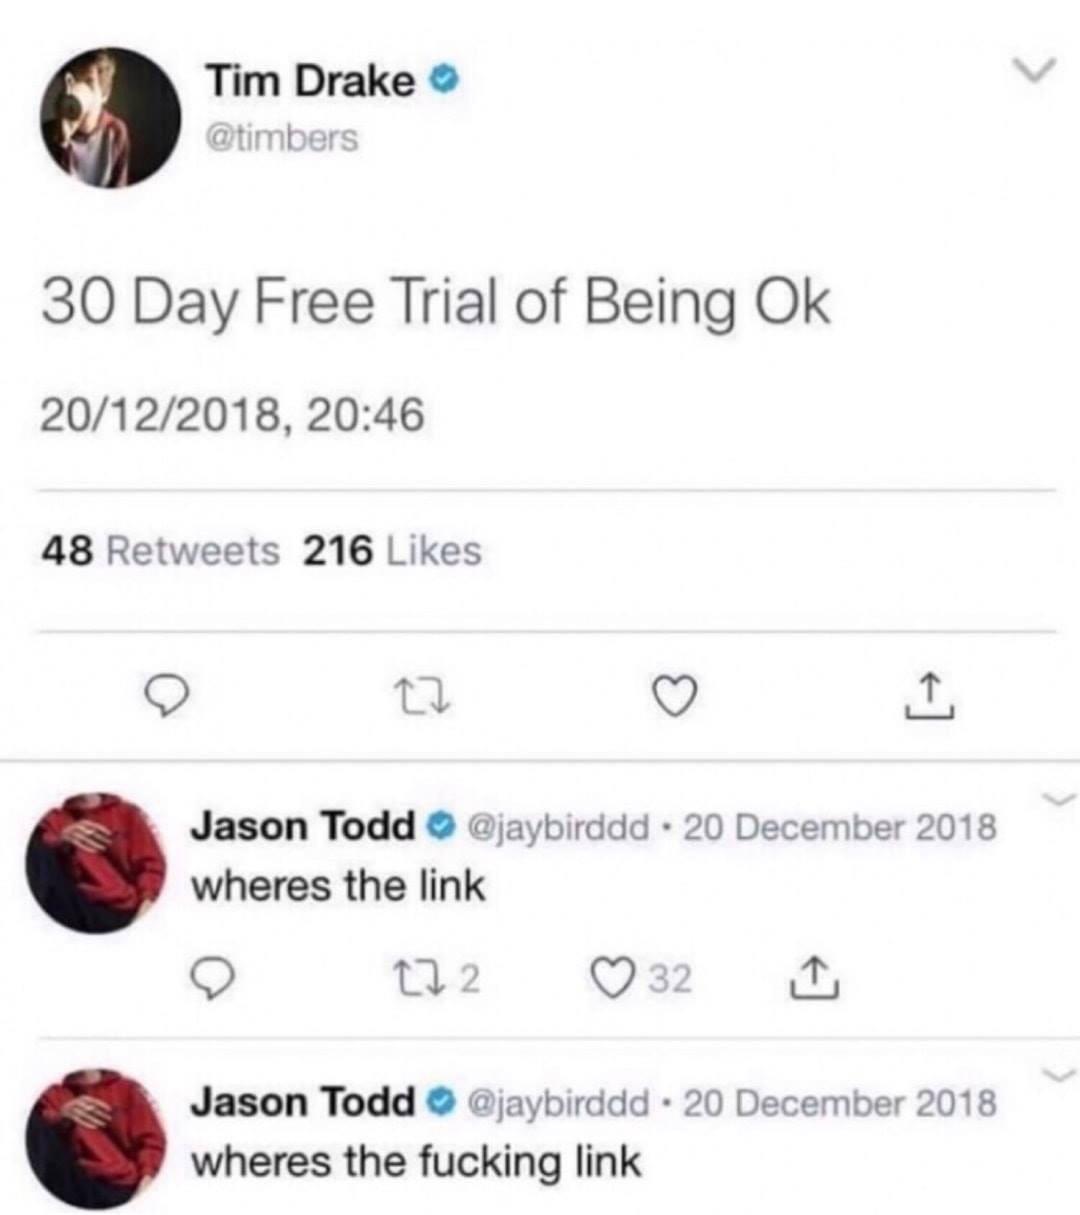 depression depression-memes depression text: Tim Drake e @timbers 30 Day Free Trial of Being Ok 20/12/2018, 20:46 216 Likes 48 Jason Todd e @jaybirddd • 20 December 2018 wheres the link 032 Jason Todd e @jaybirddd • 20 December 2018 wheres the fucking link 